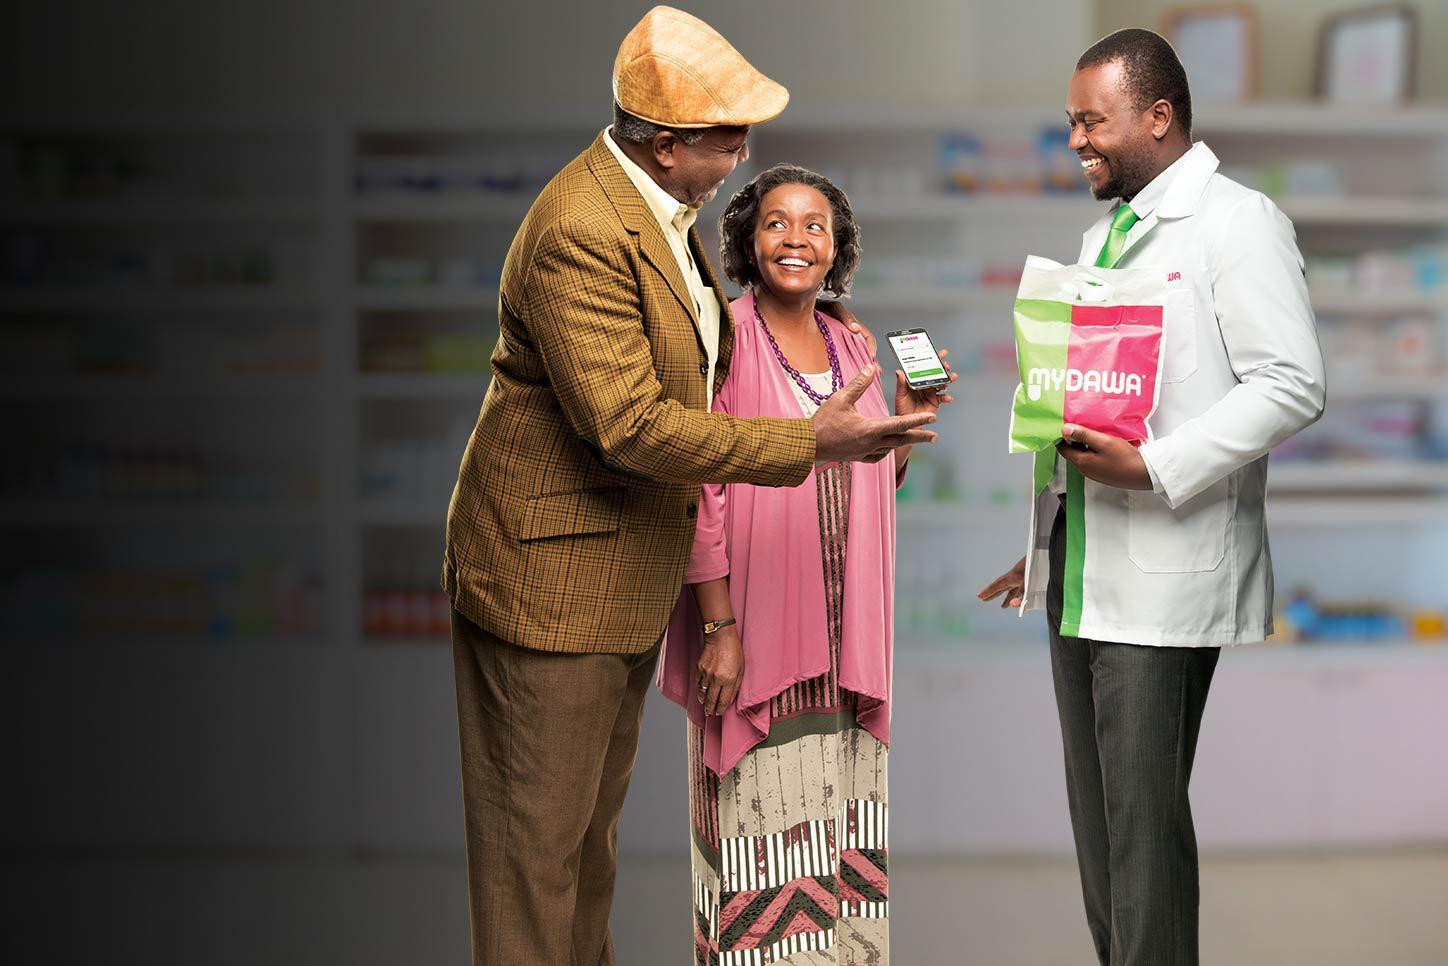 Kenya’s MyDawa aims to be an all-in-one health platform backed by $20 million funding